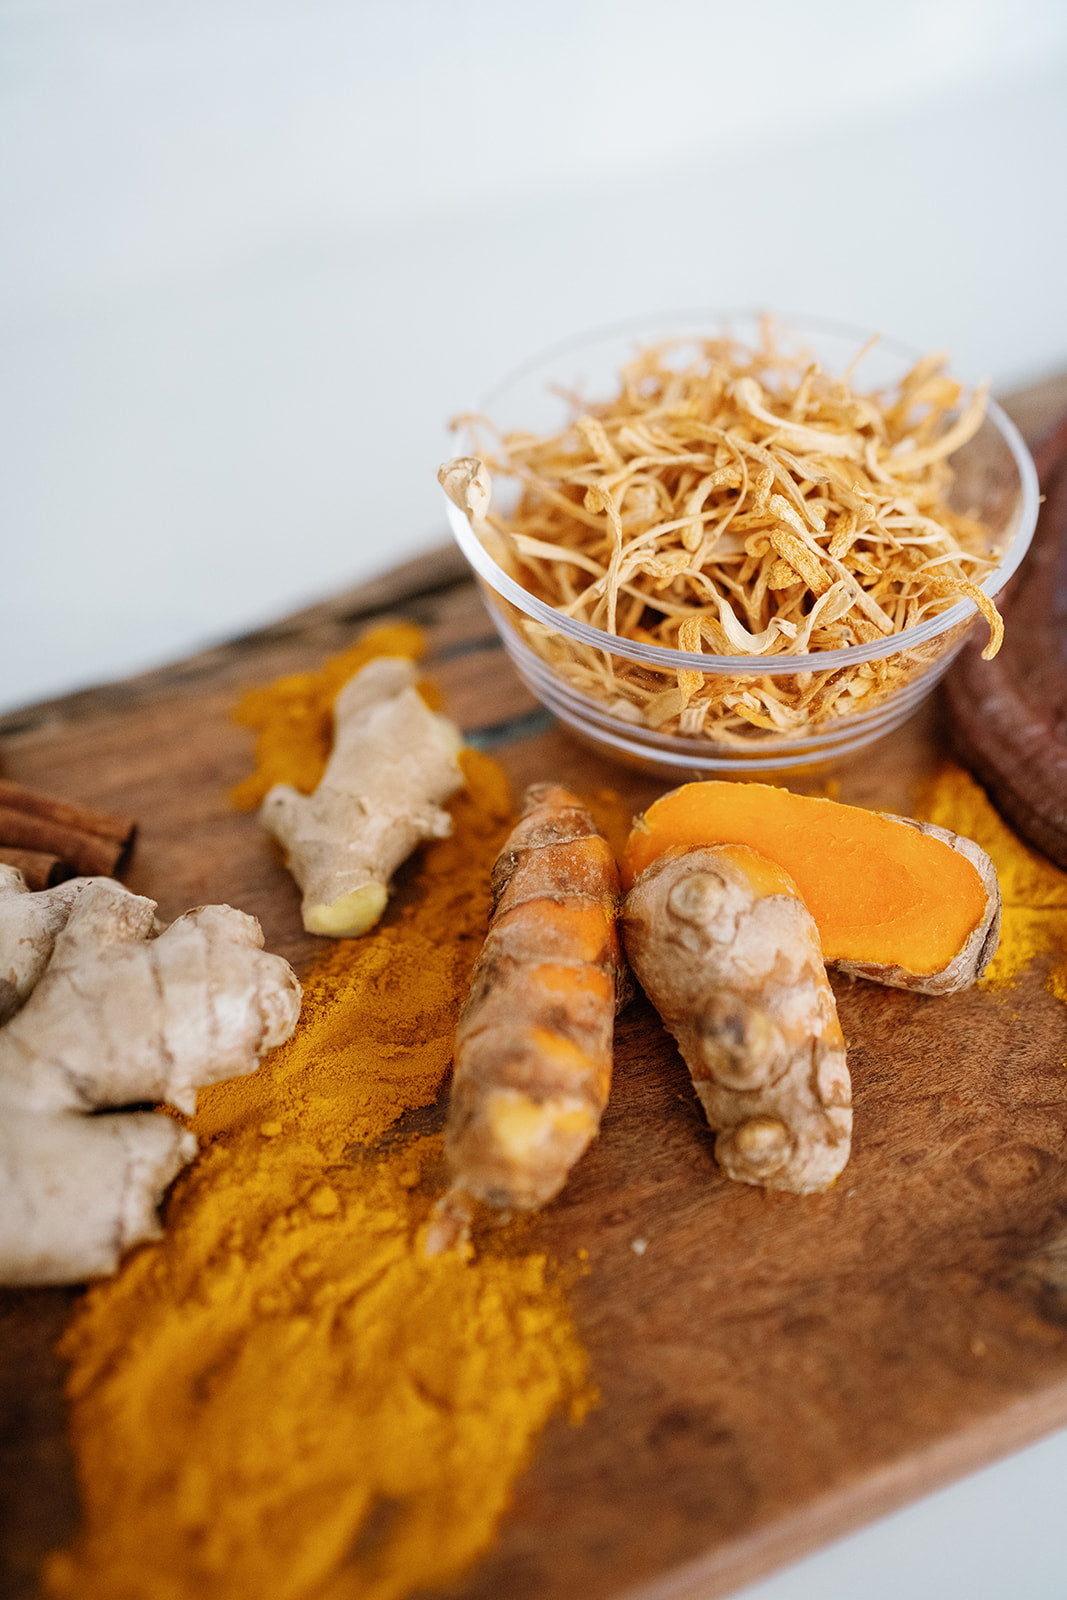 Wooden cutting board with Ginger root, turmeric cut open to show the vibrant orange color and mushroom root in a clear bowl